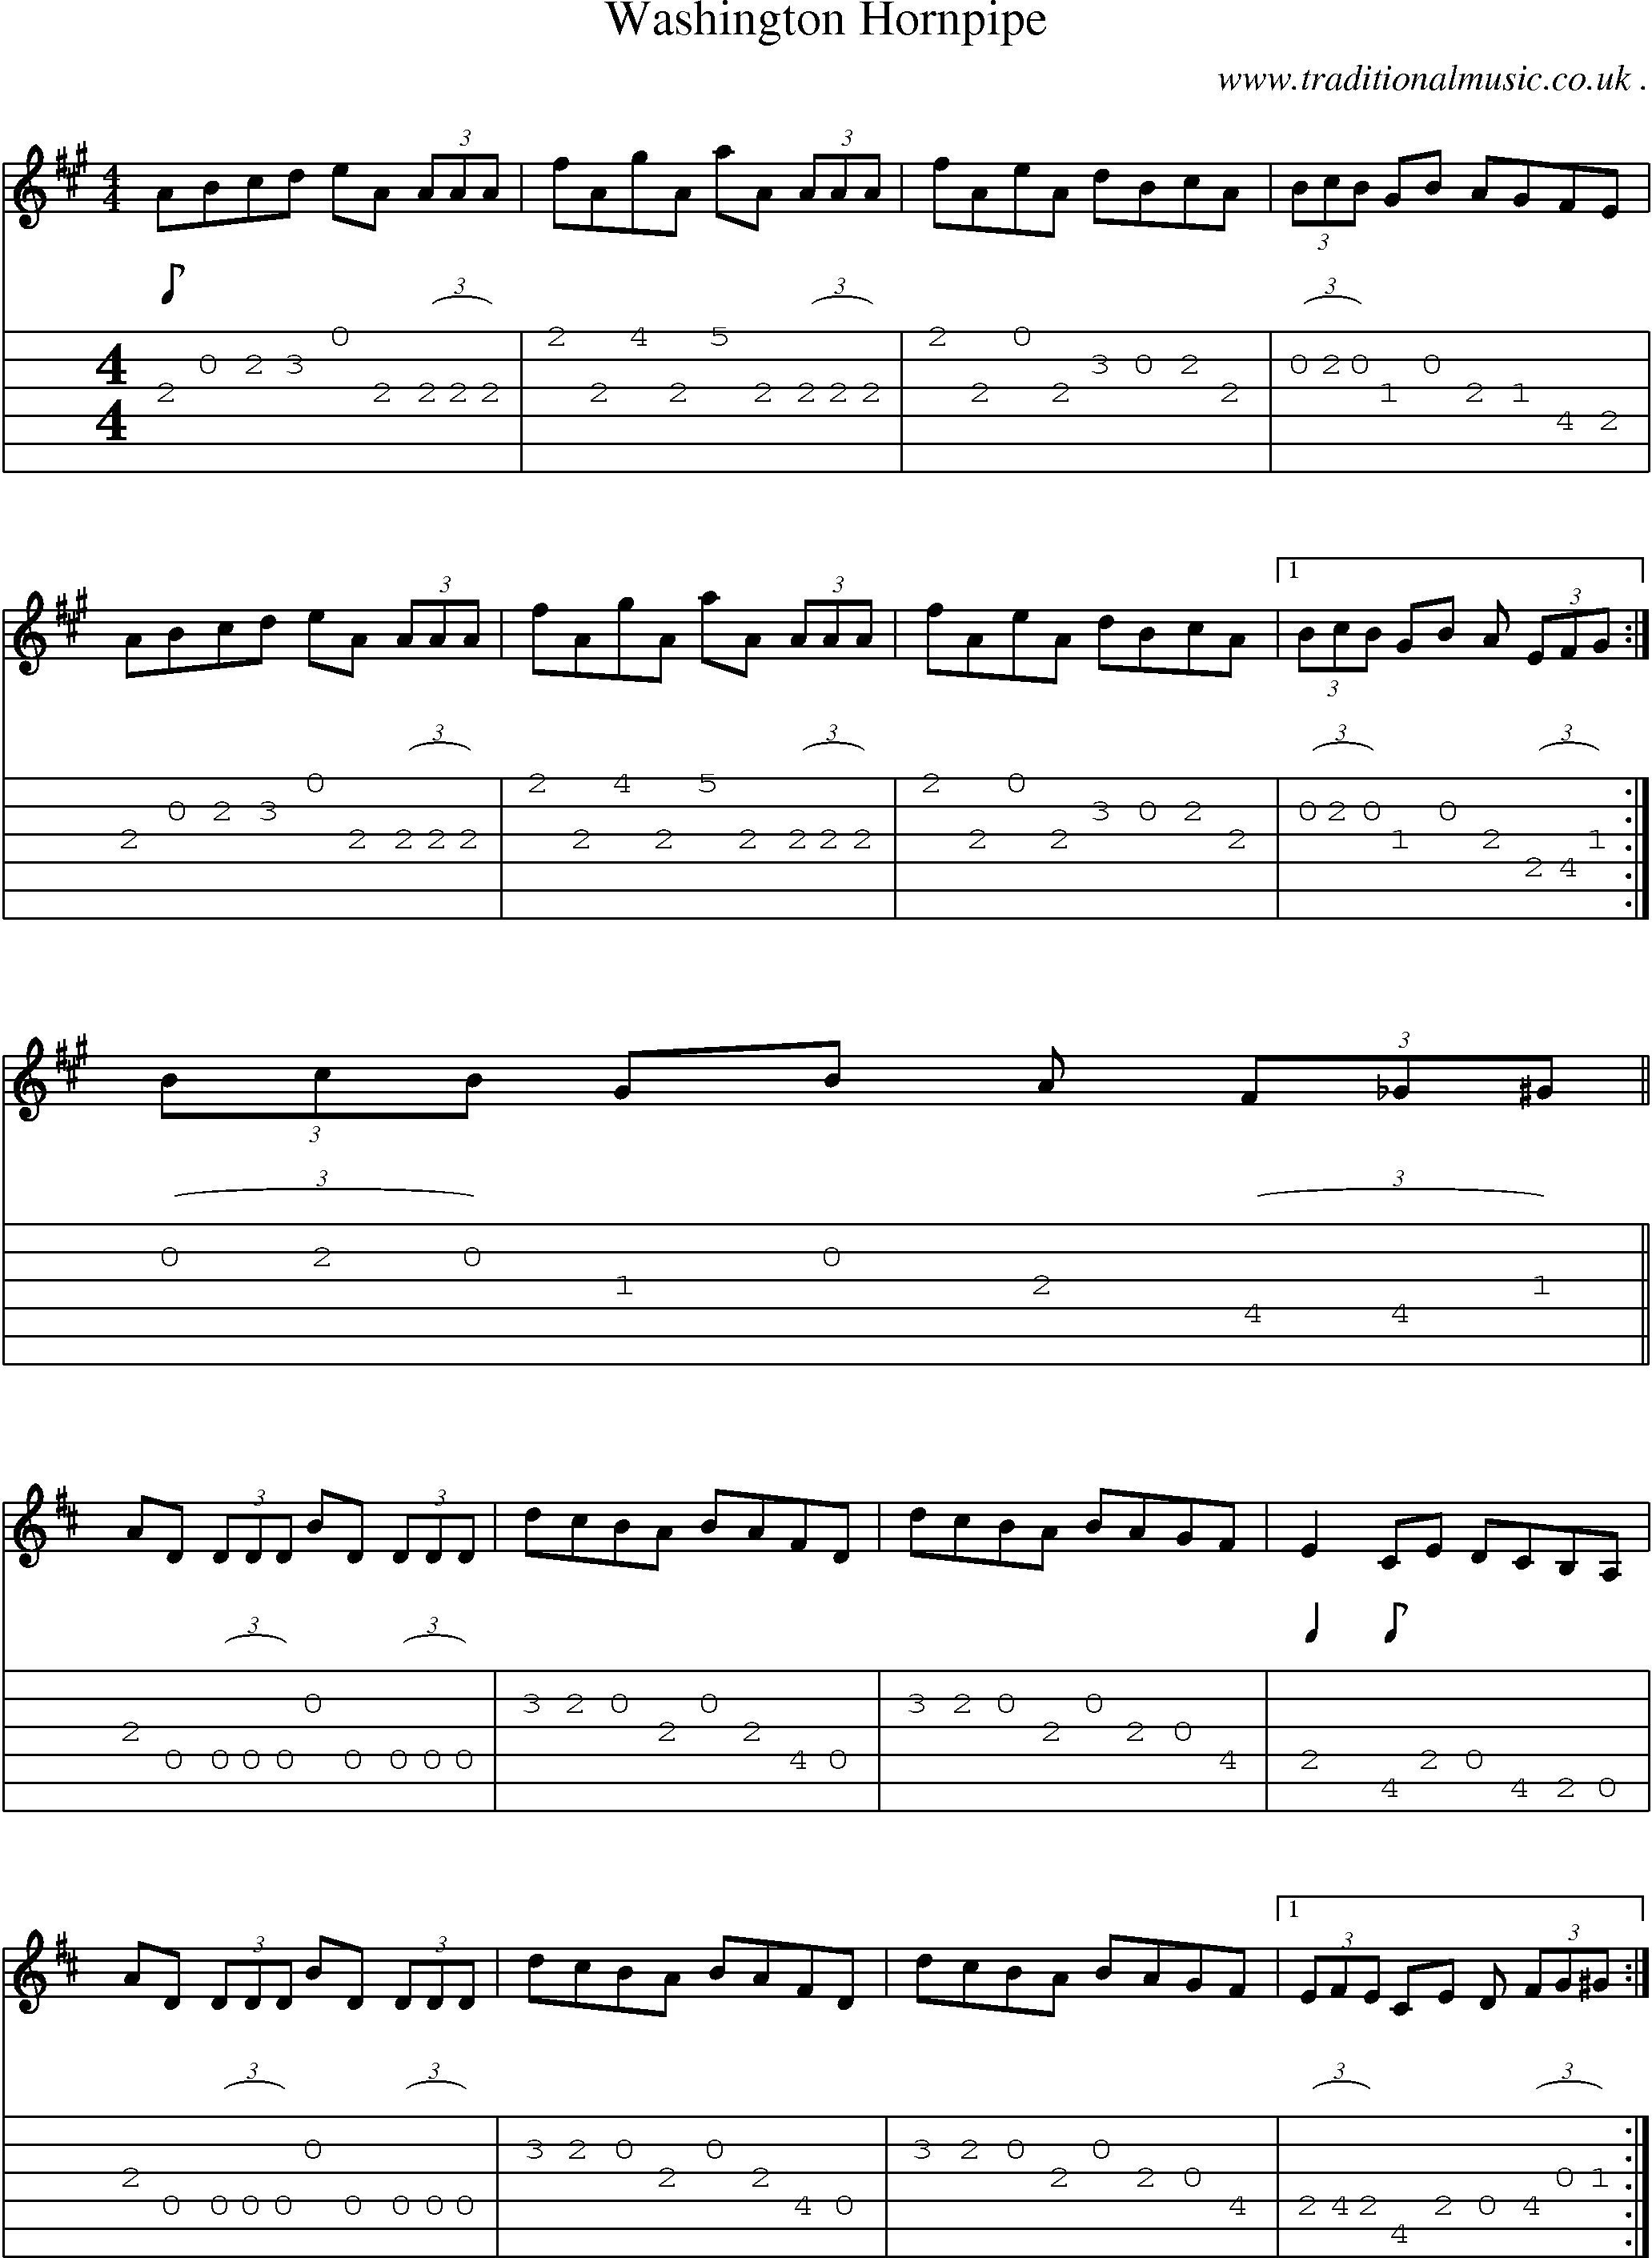 Sheet-Music and Guitar Tabs for Washington Hornpipe